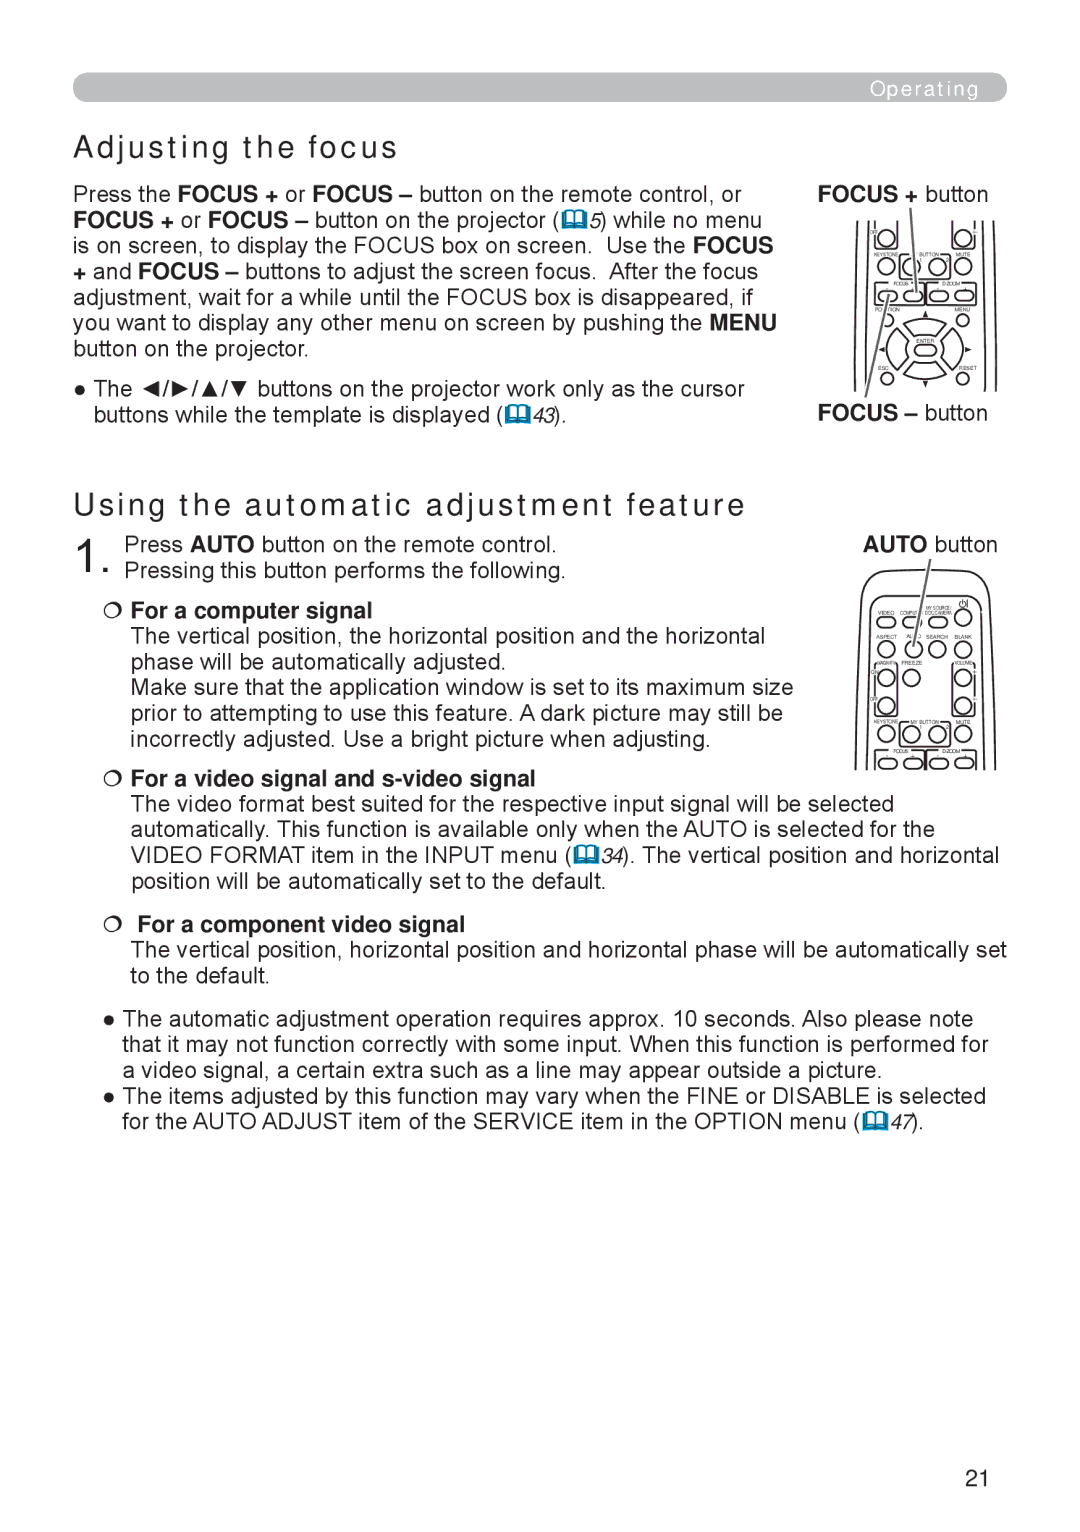 Apple ED-A101, ED-A111 manual Adjusting the focus, Using the automatic adjustment feature 